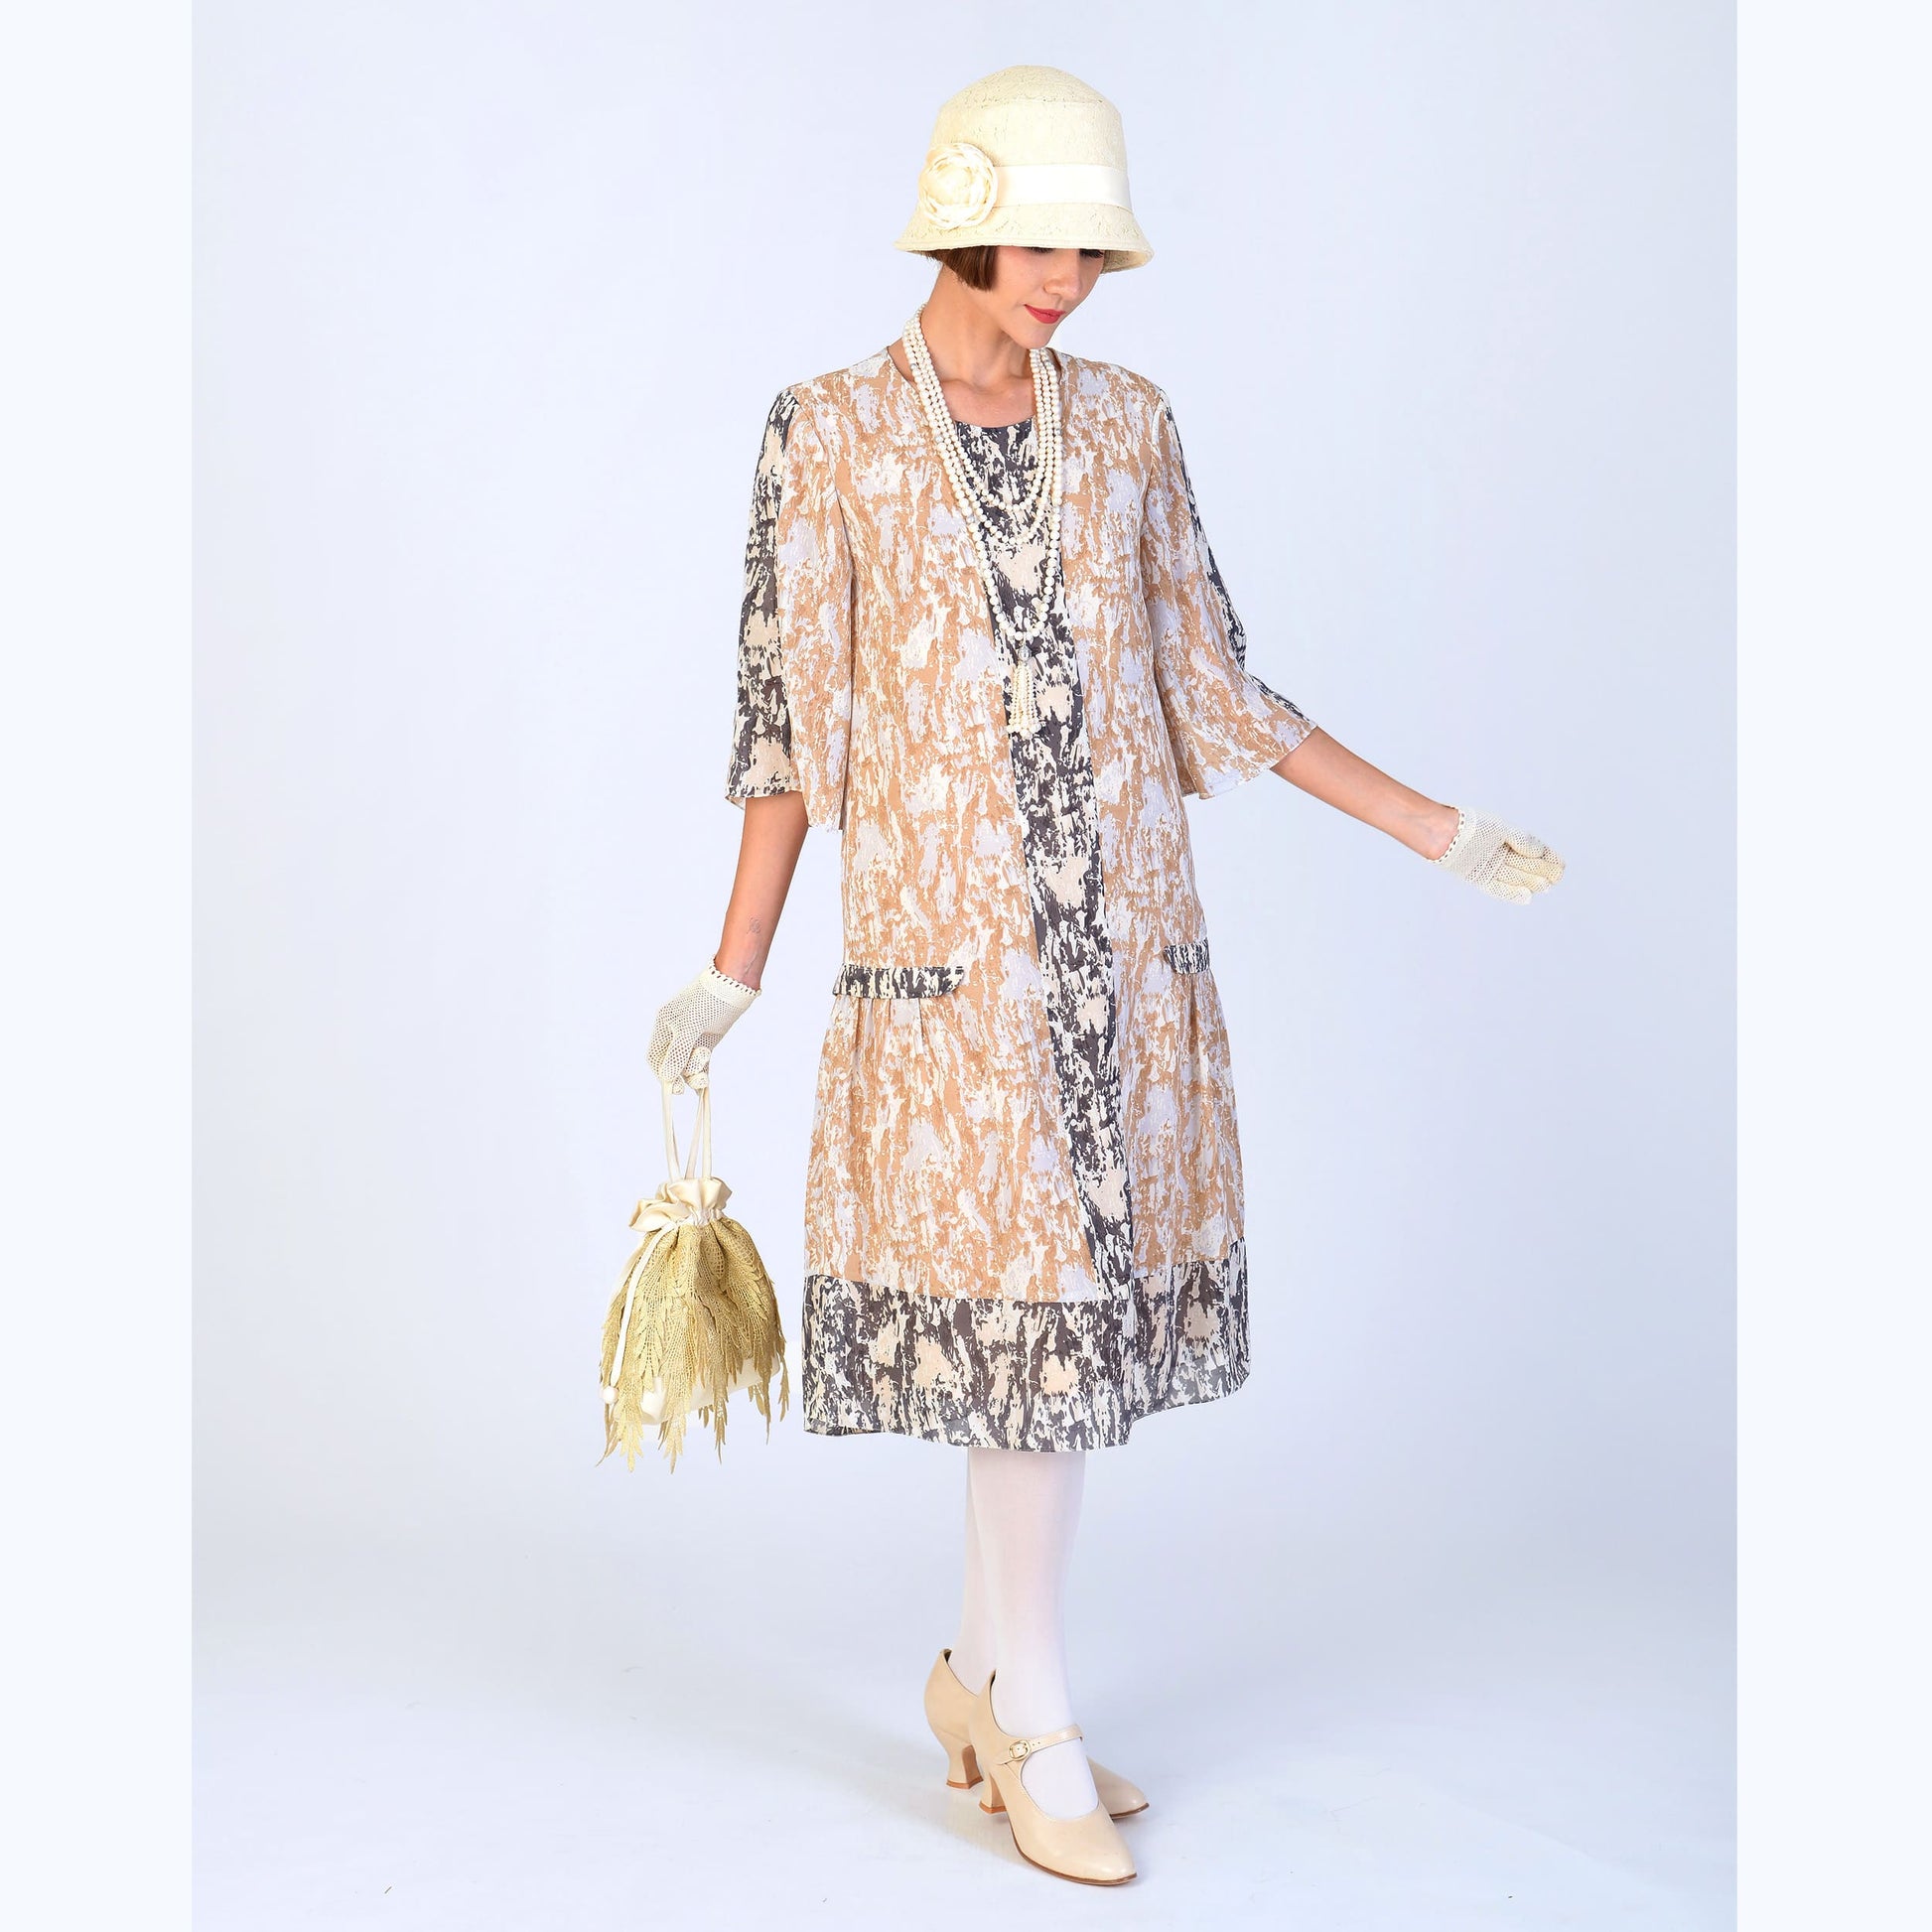 This roaring twenties dress in brown and black camouflage color can be worn as a Great Gatsby dress, flapper or Downton Abbey dress 